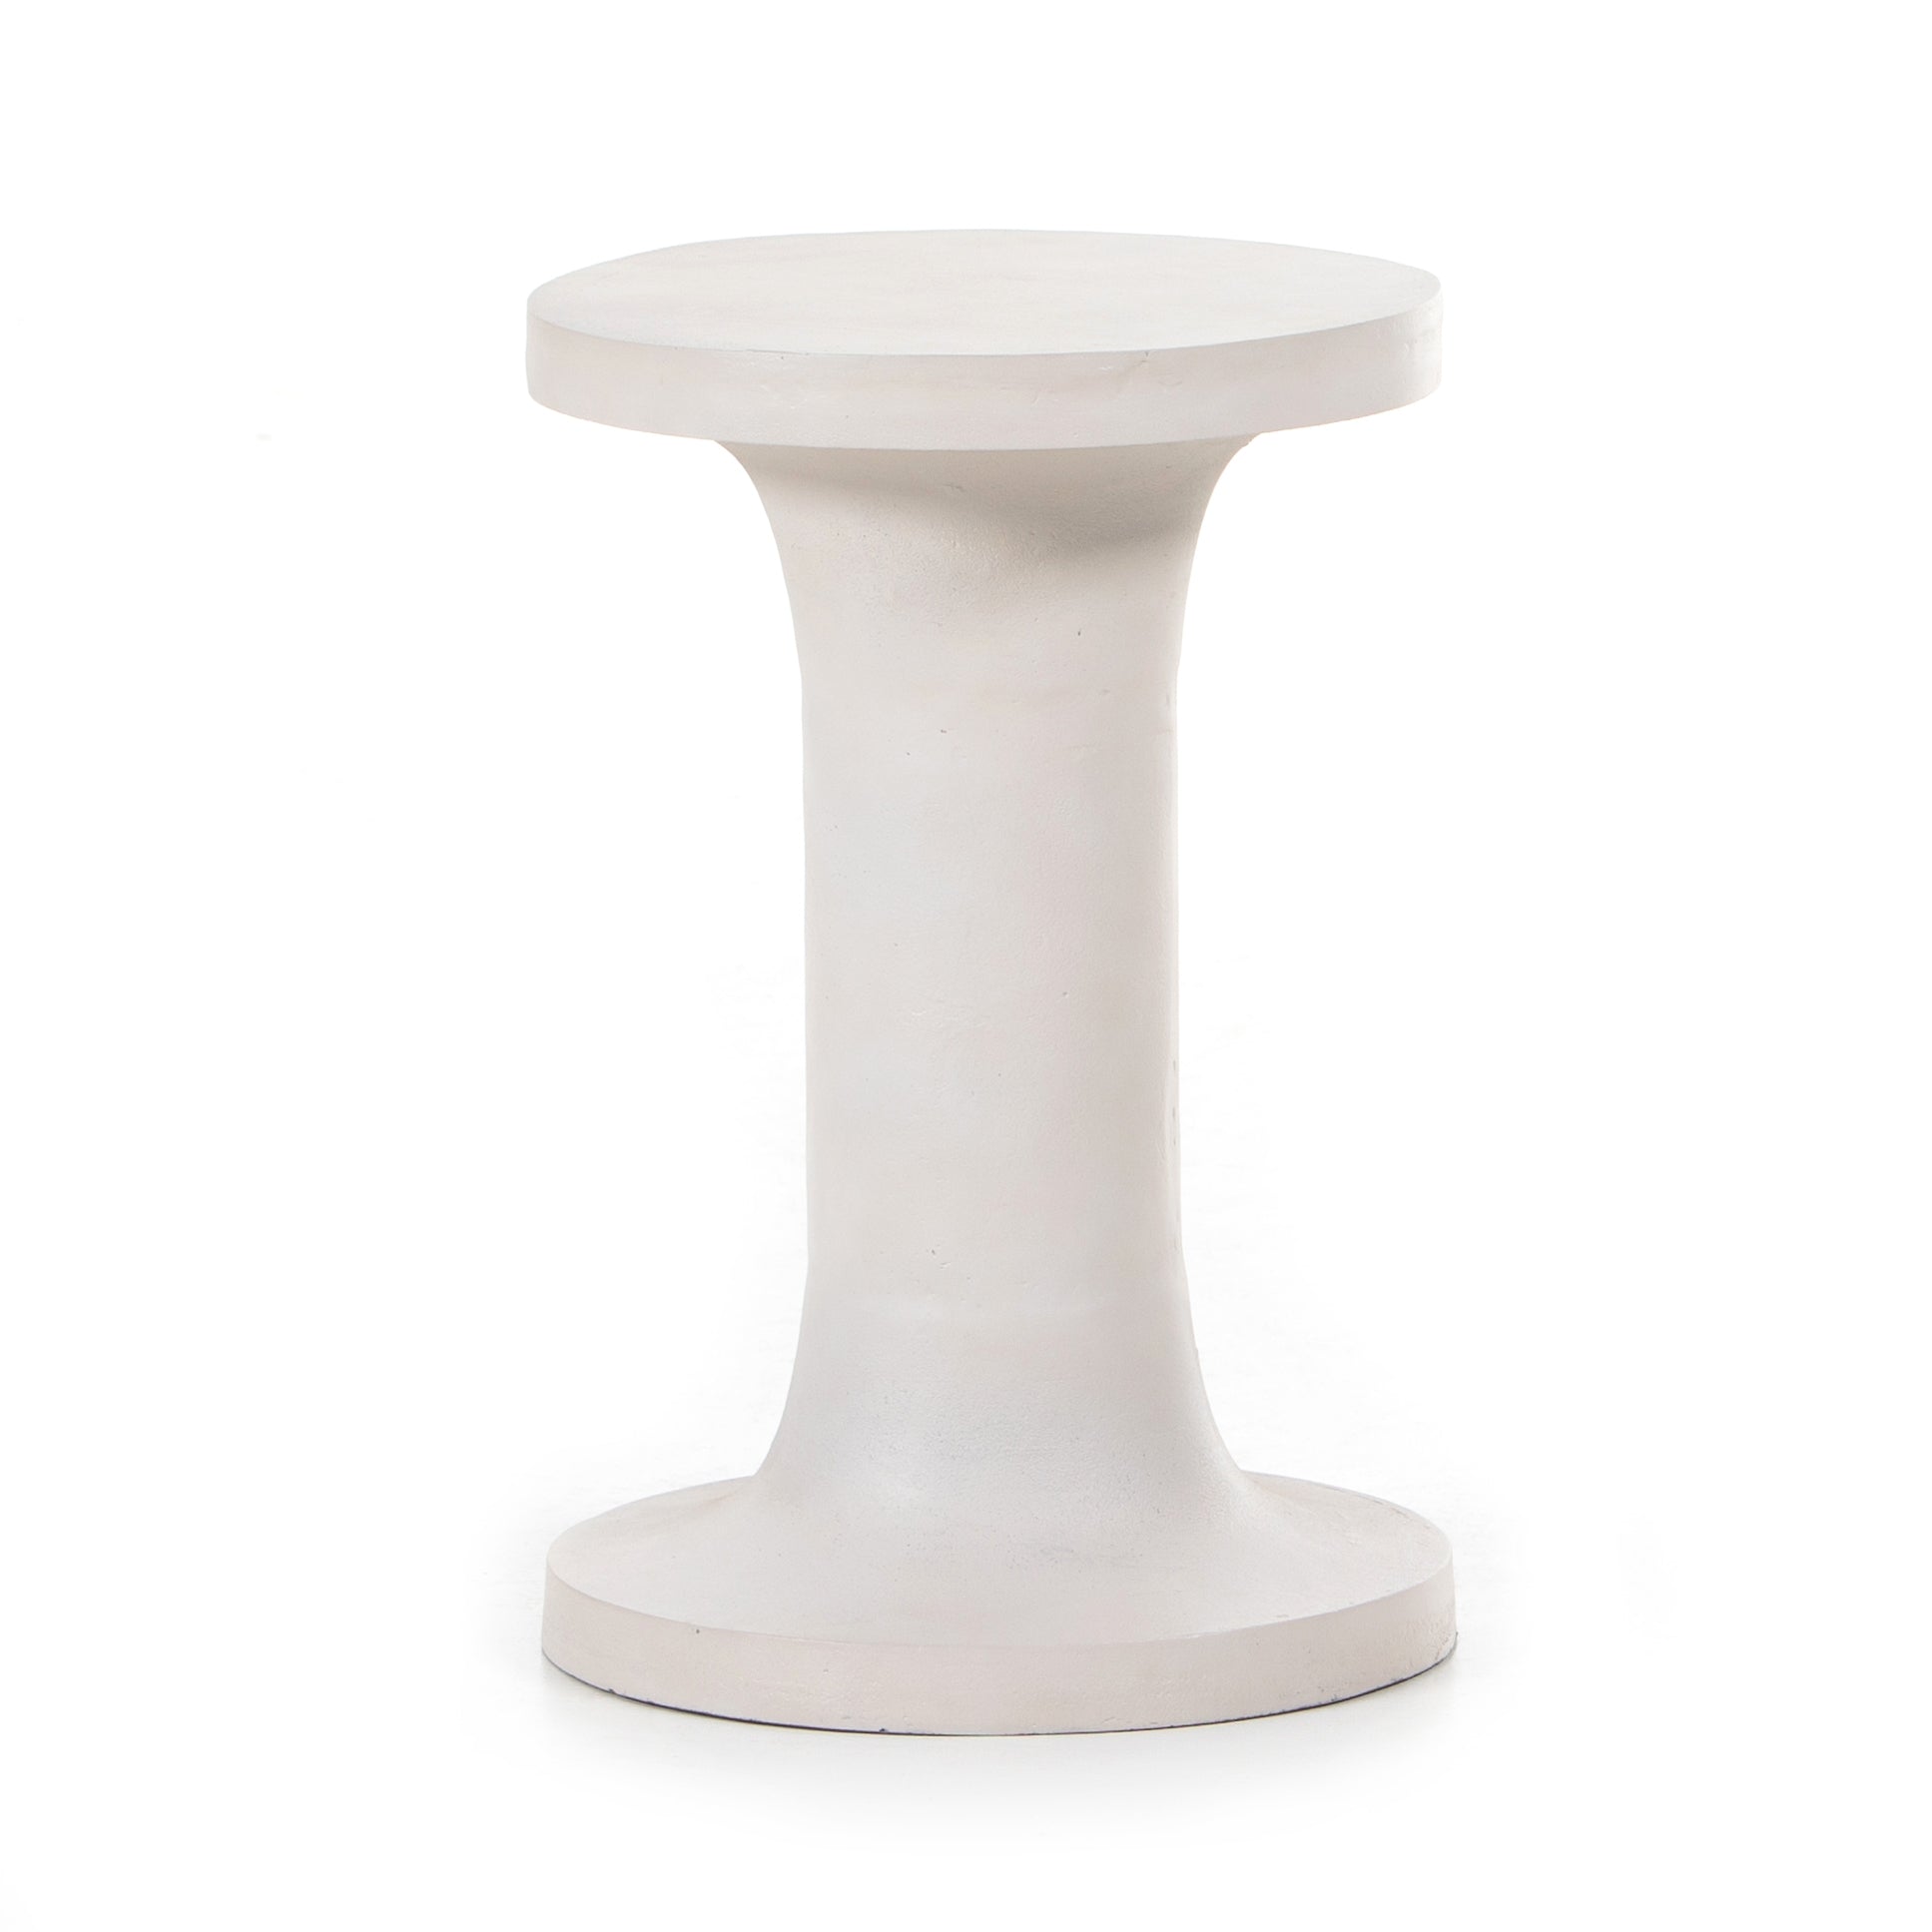 Made from white-finished cast aluminum with high texture, this dramatically tapered Gino End Table - Matte White makes for a stylish spot to keep a favorite book or drink within reach. Tabletop surfaces may vary in texture and dimples, reflective of materials' organic roots.  Overall Dimensions: 13.00"w x 13.00"d x 20.00"h